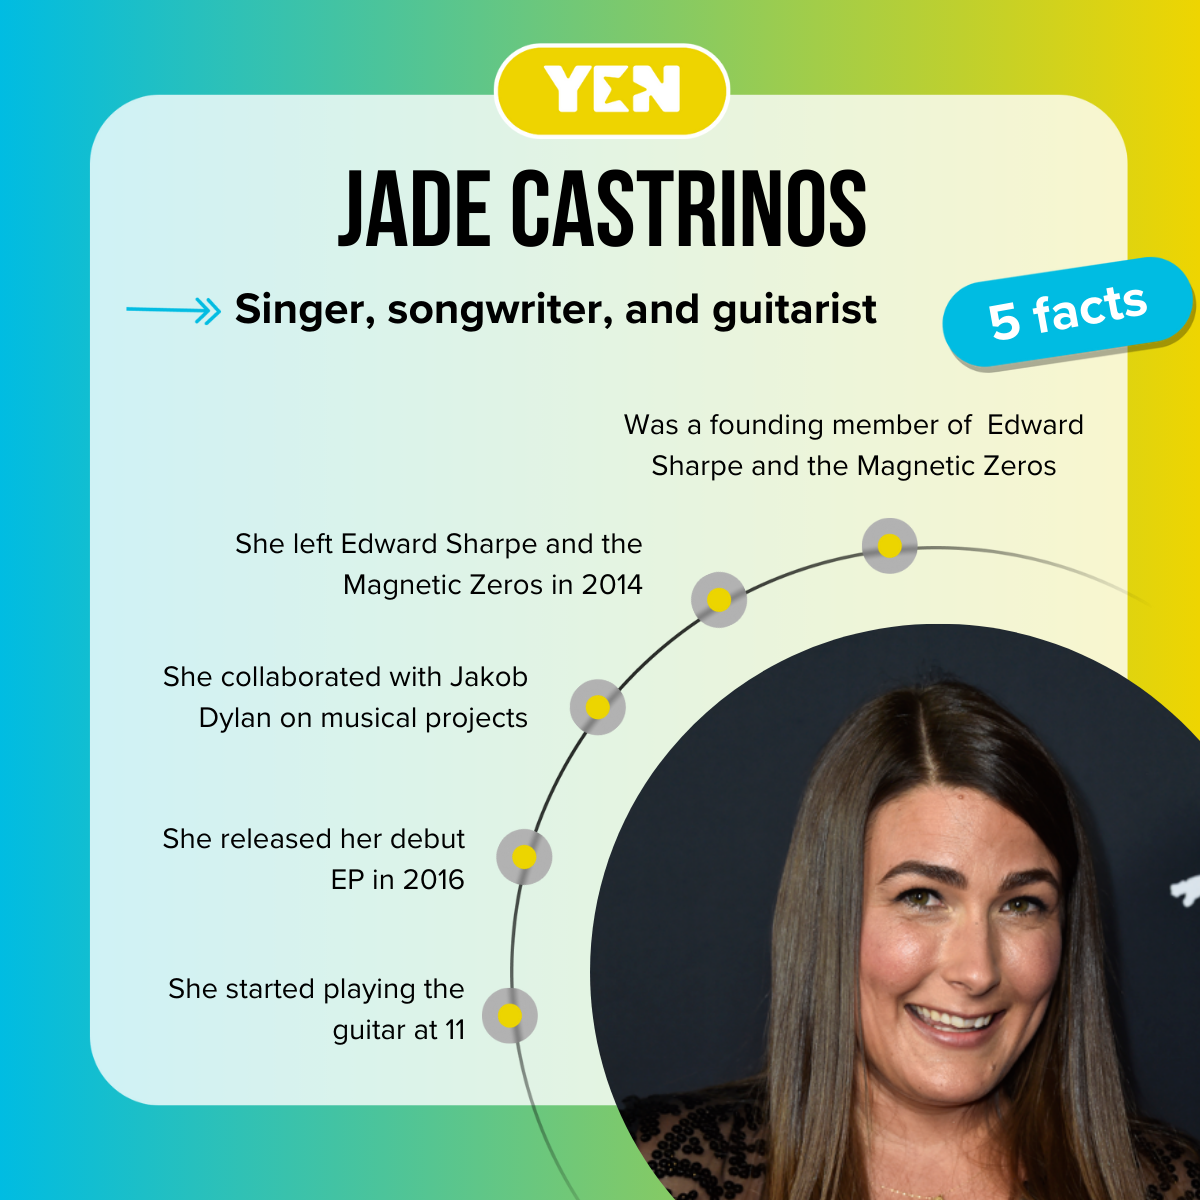 Top facts about Jade Castrinos